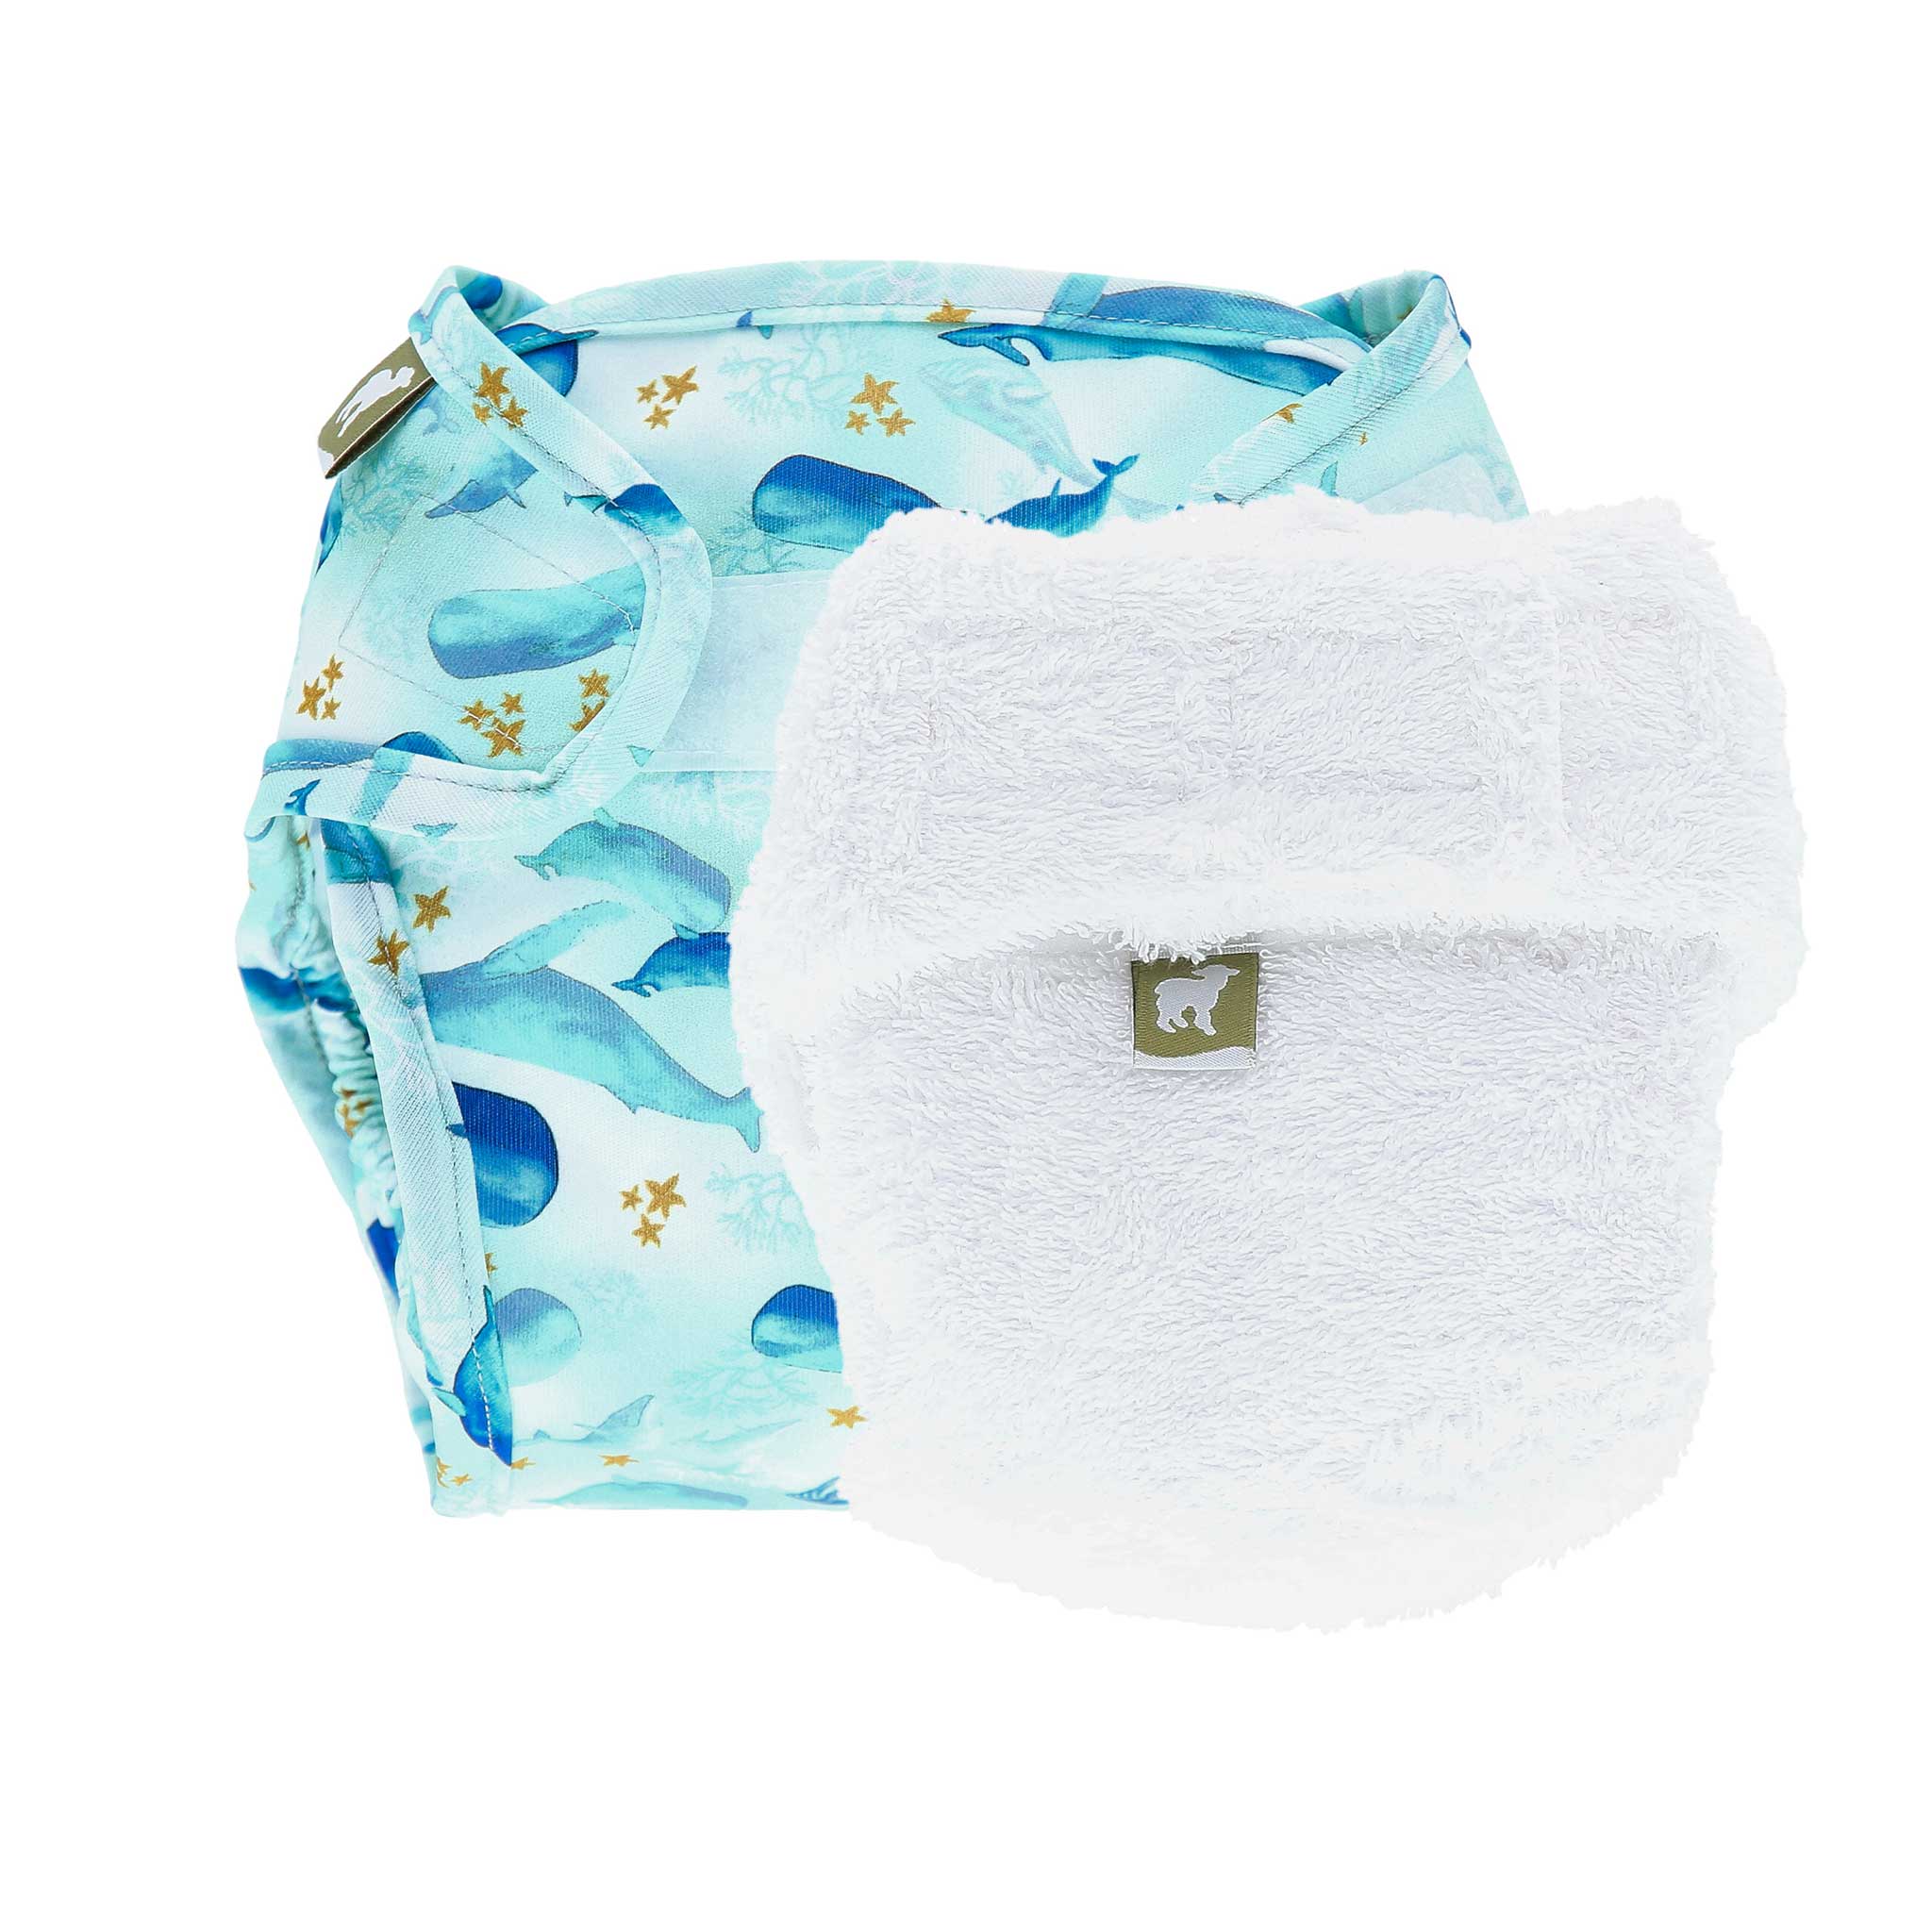 LittleLamb cloth cotton nappy and wrap trial kit 